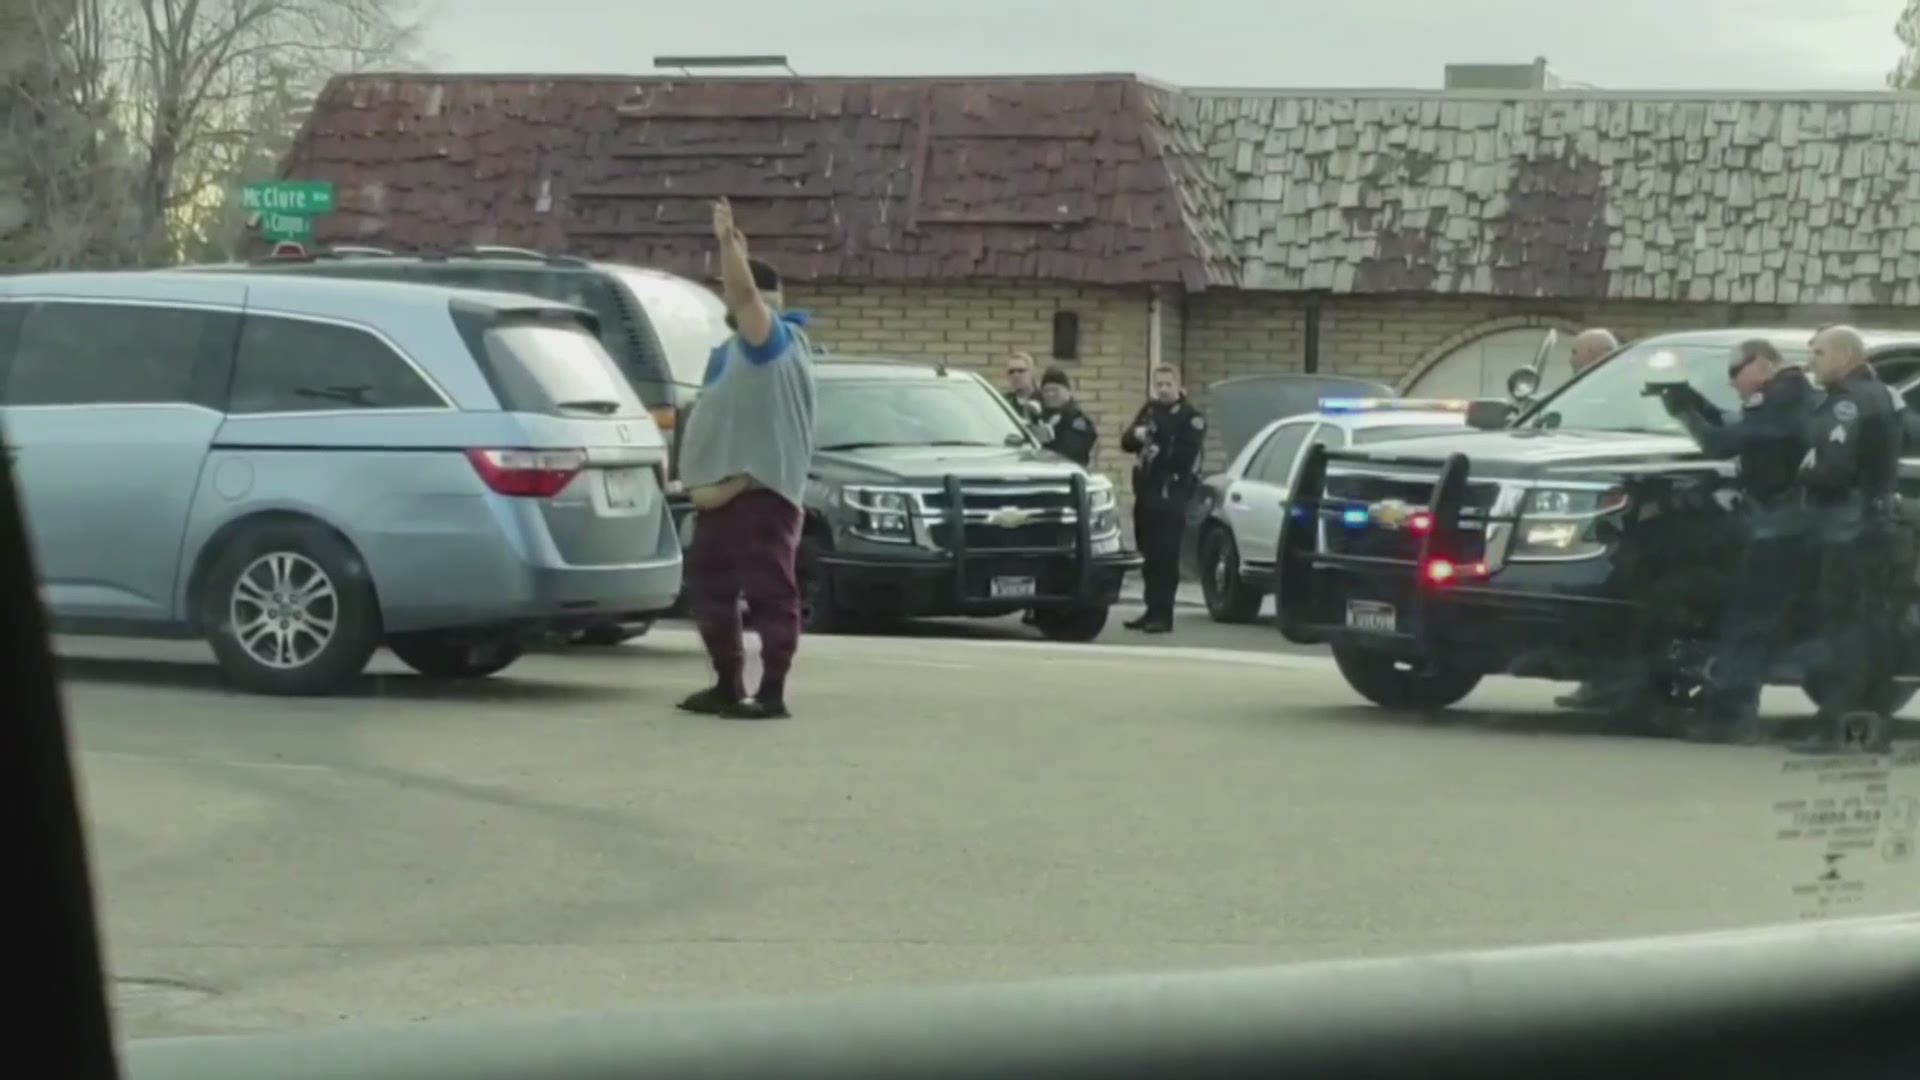 A KTVB viewer sent in cell phone video showing police arresting a suspect in a Caldwell bank robbery Thursday morning.